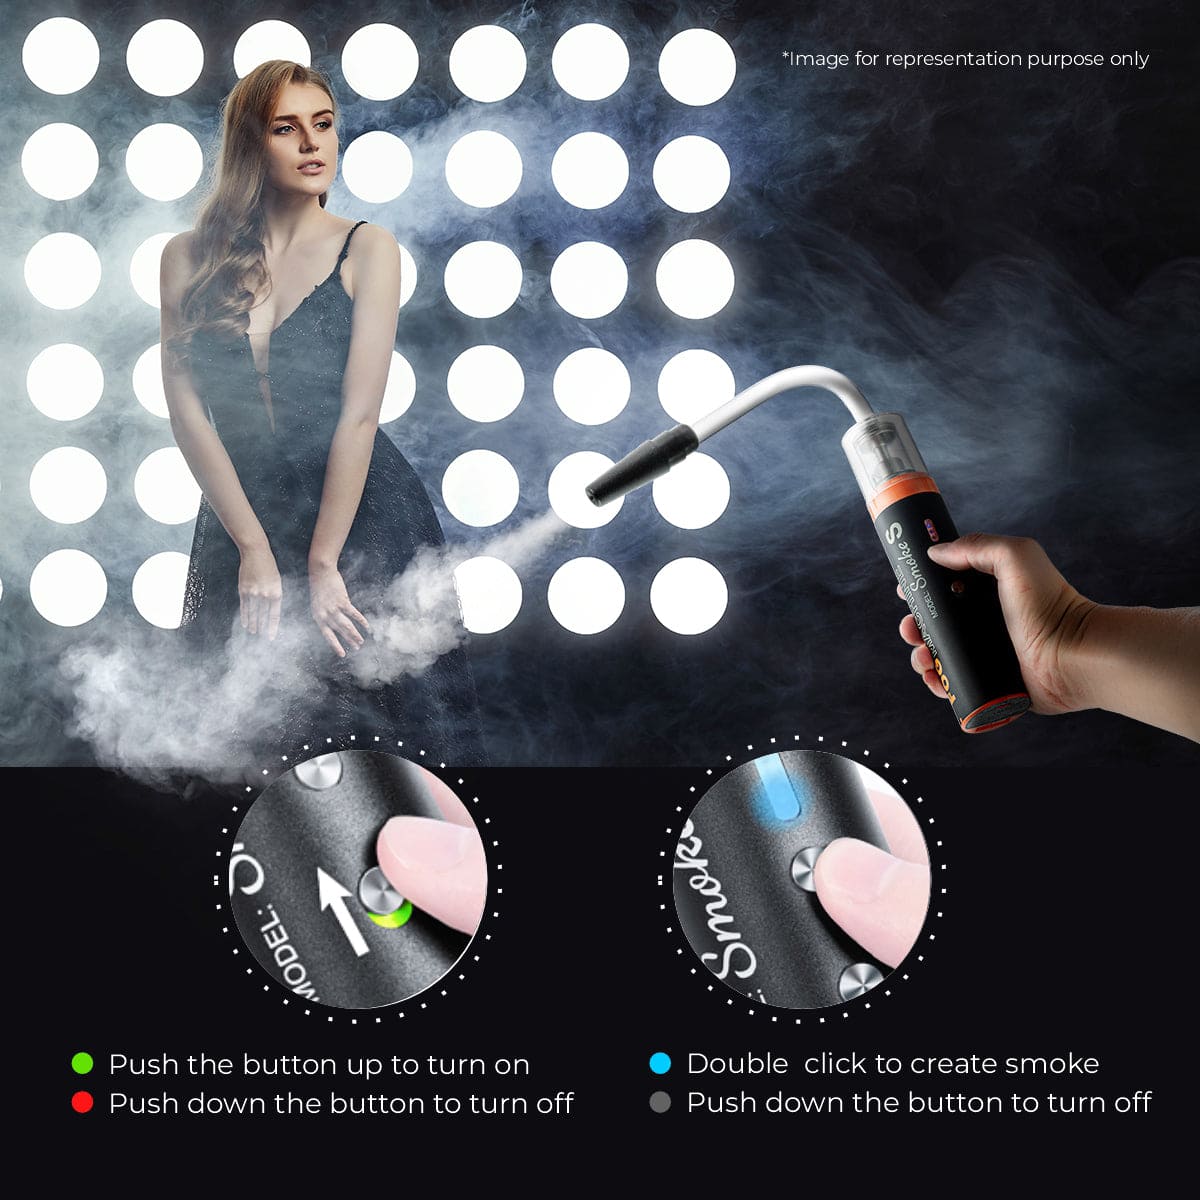 LENSGO Smoke S Hand-held Fog Machine, Portable Smoke Machine with Remote Control LENSGO Fogger for Photography, Outdoor Events, Parties, Stage Effects, Halloween, Disinfection or Weddings